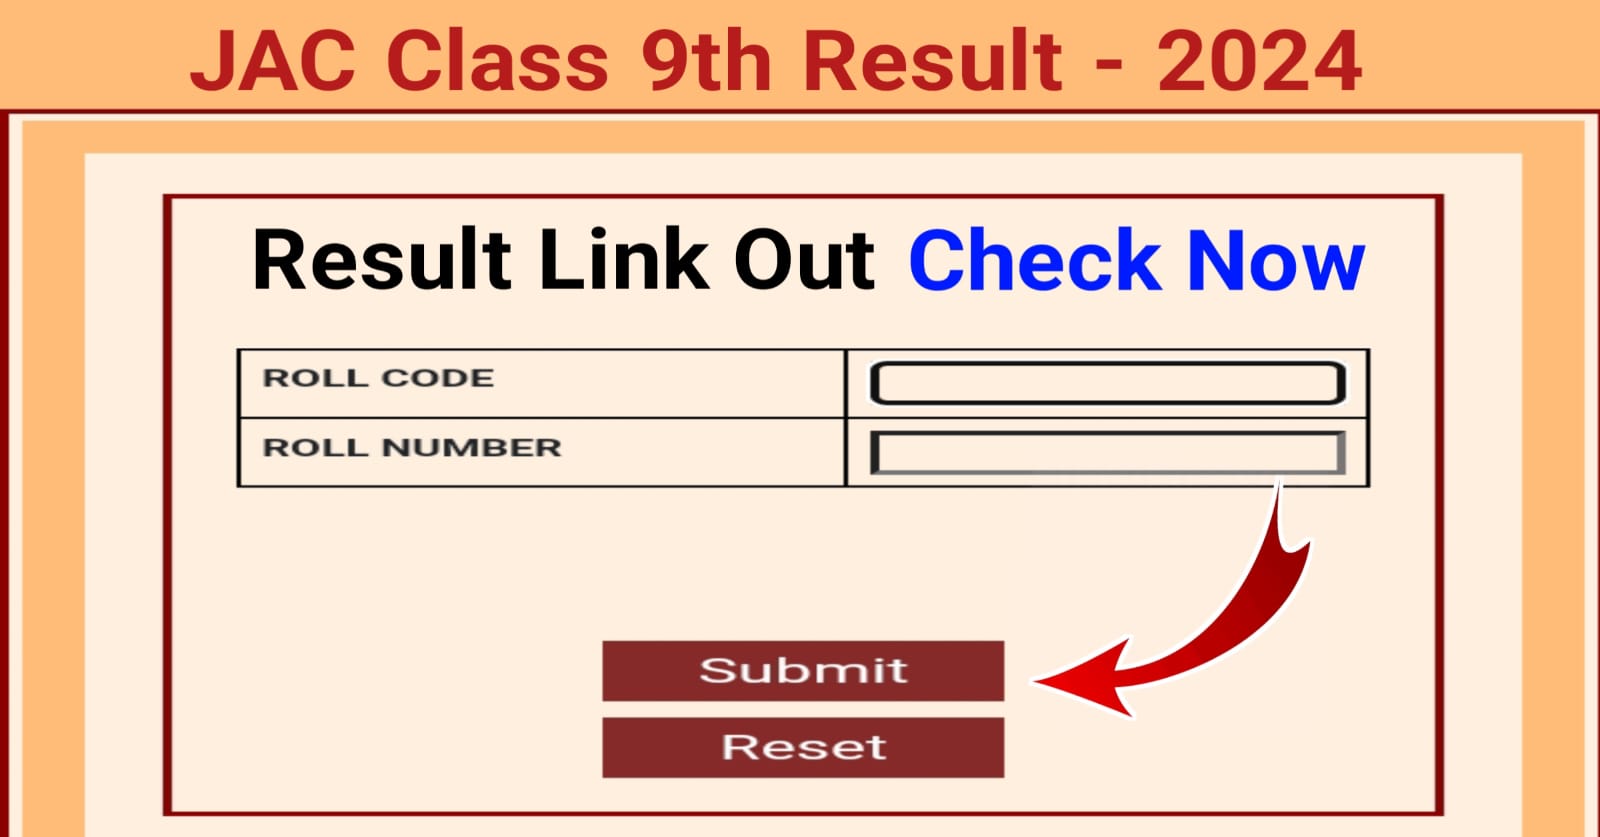 JAC Class 9 Result 2024 - Link Out Check Now